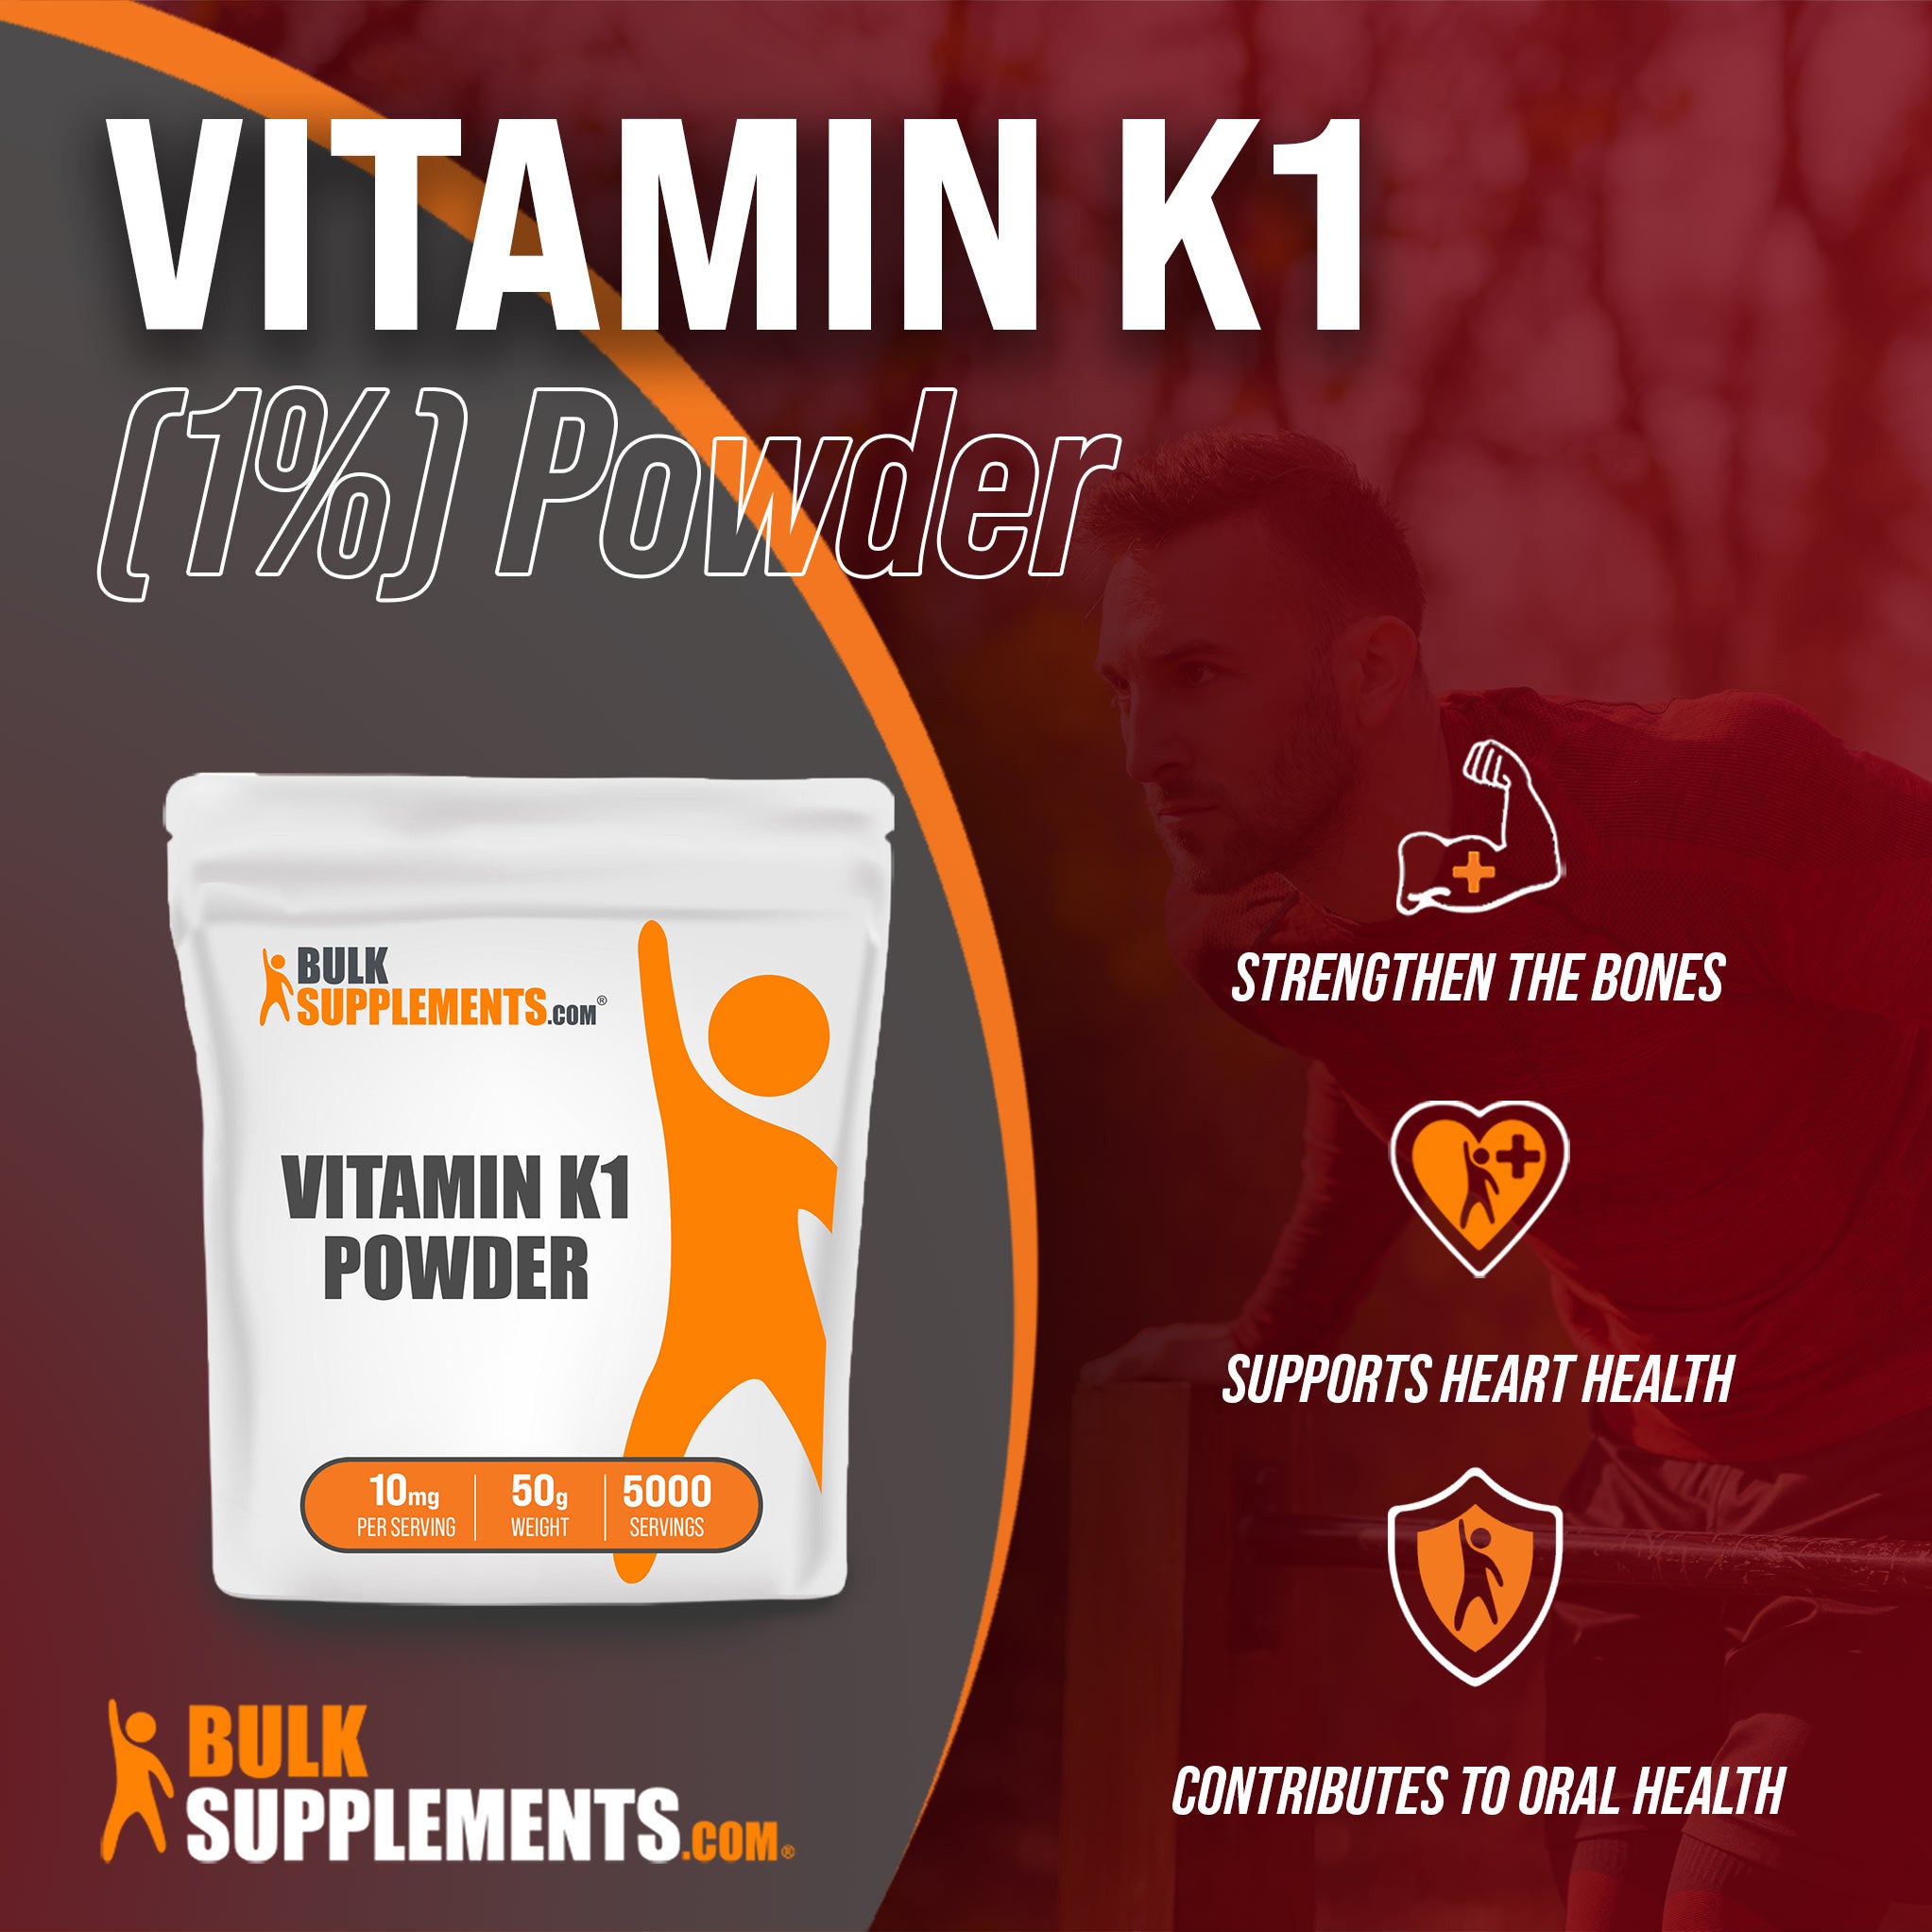 Benefits of Vitamin K1 Powder strengthen the bones, supports heart health, contributes to oral health